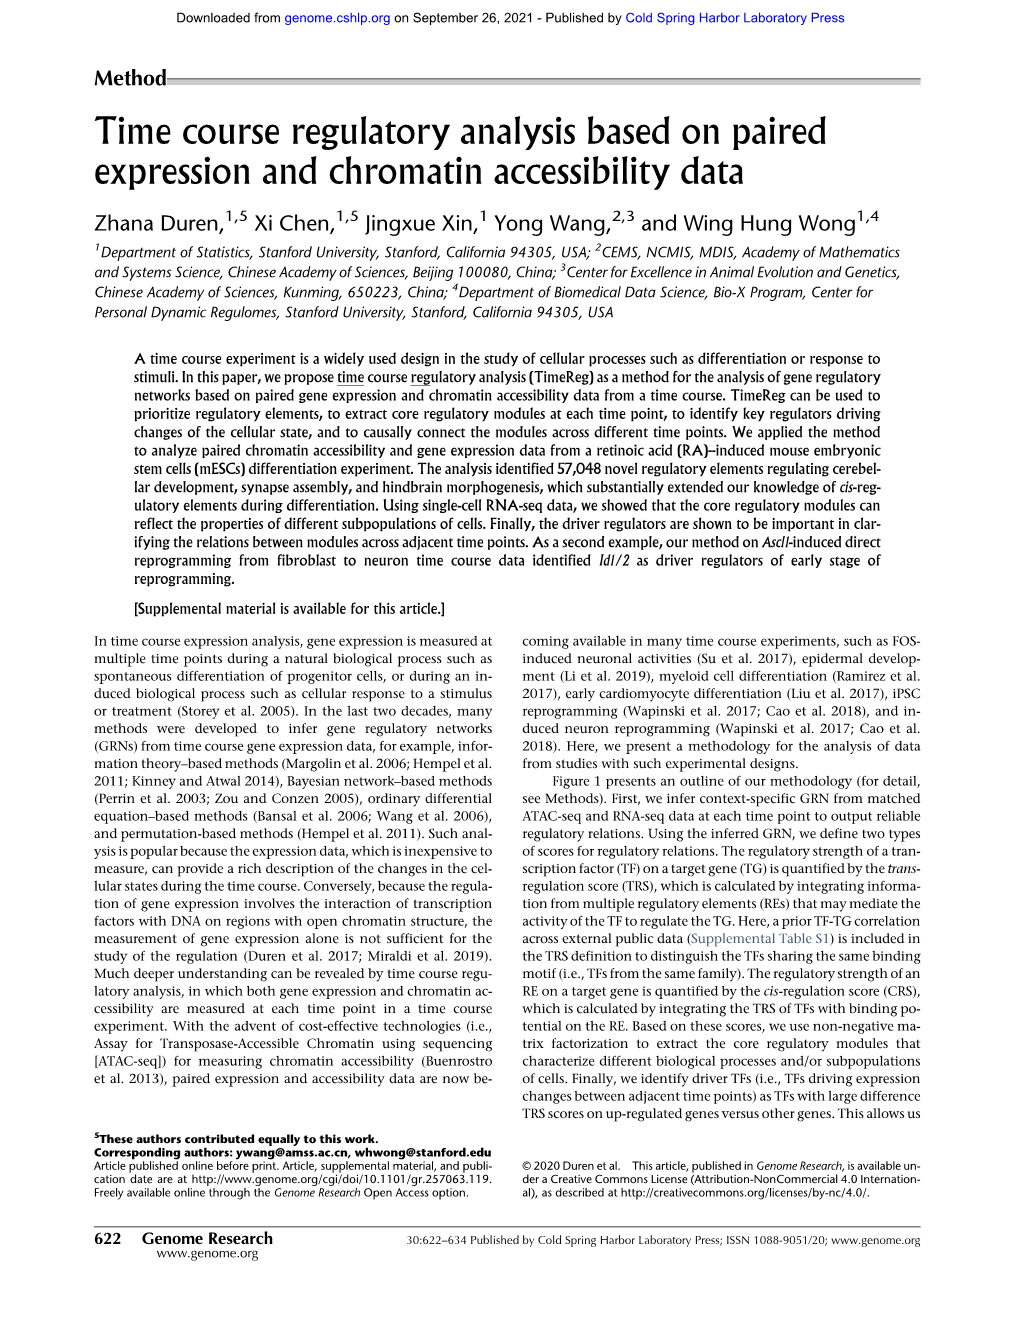 Time Course Regulatory Analysis Based on Paired Expression and Chromatin Accessibility Data